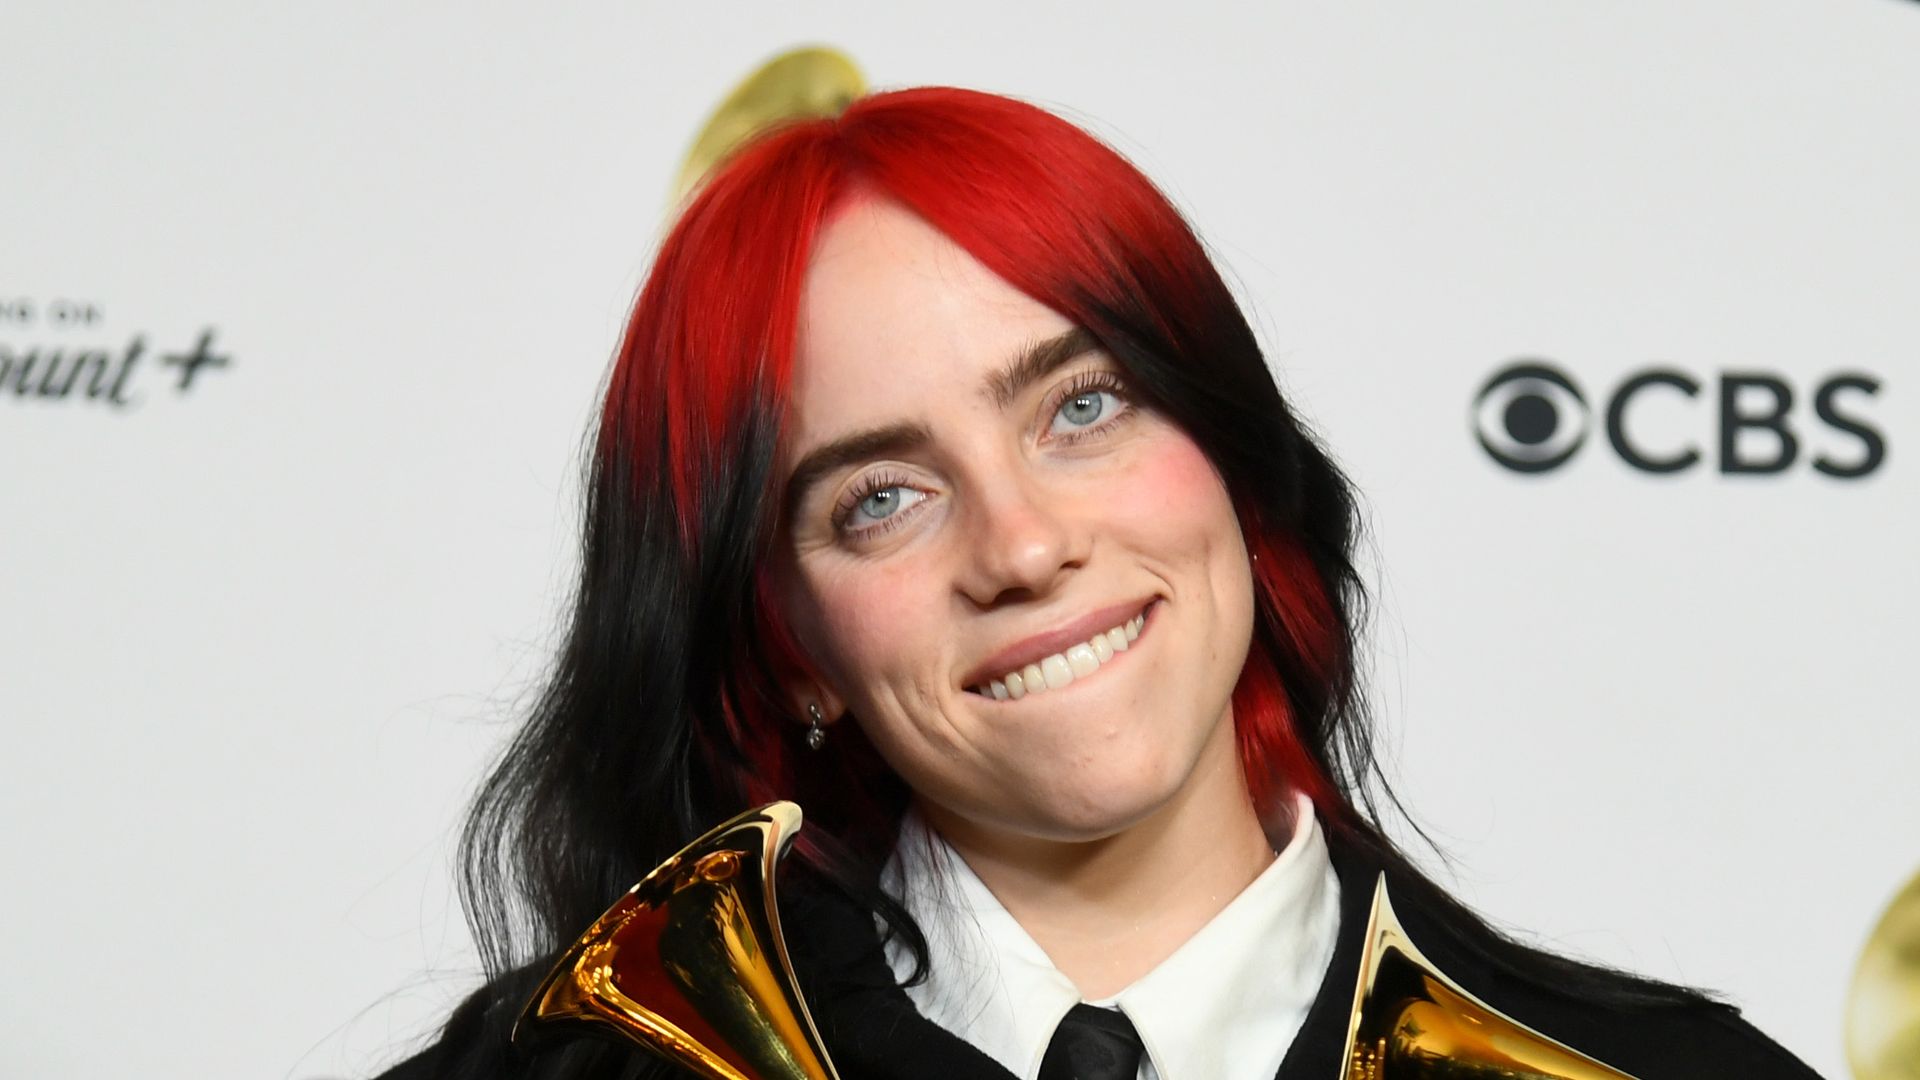 Billie Eilish strips down to a deeply plunging waistcoat with matching